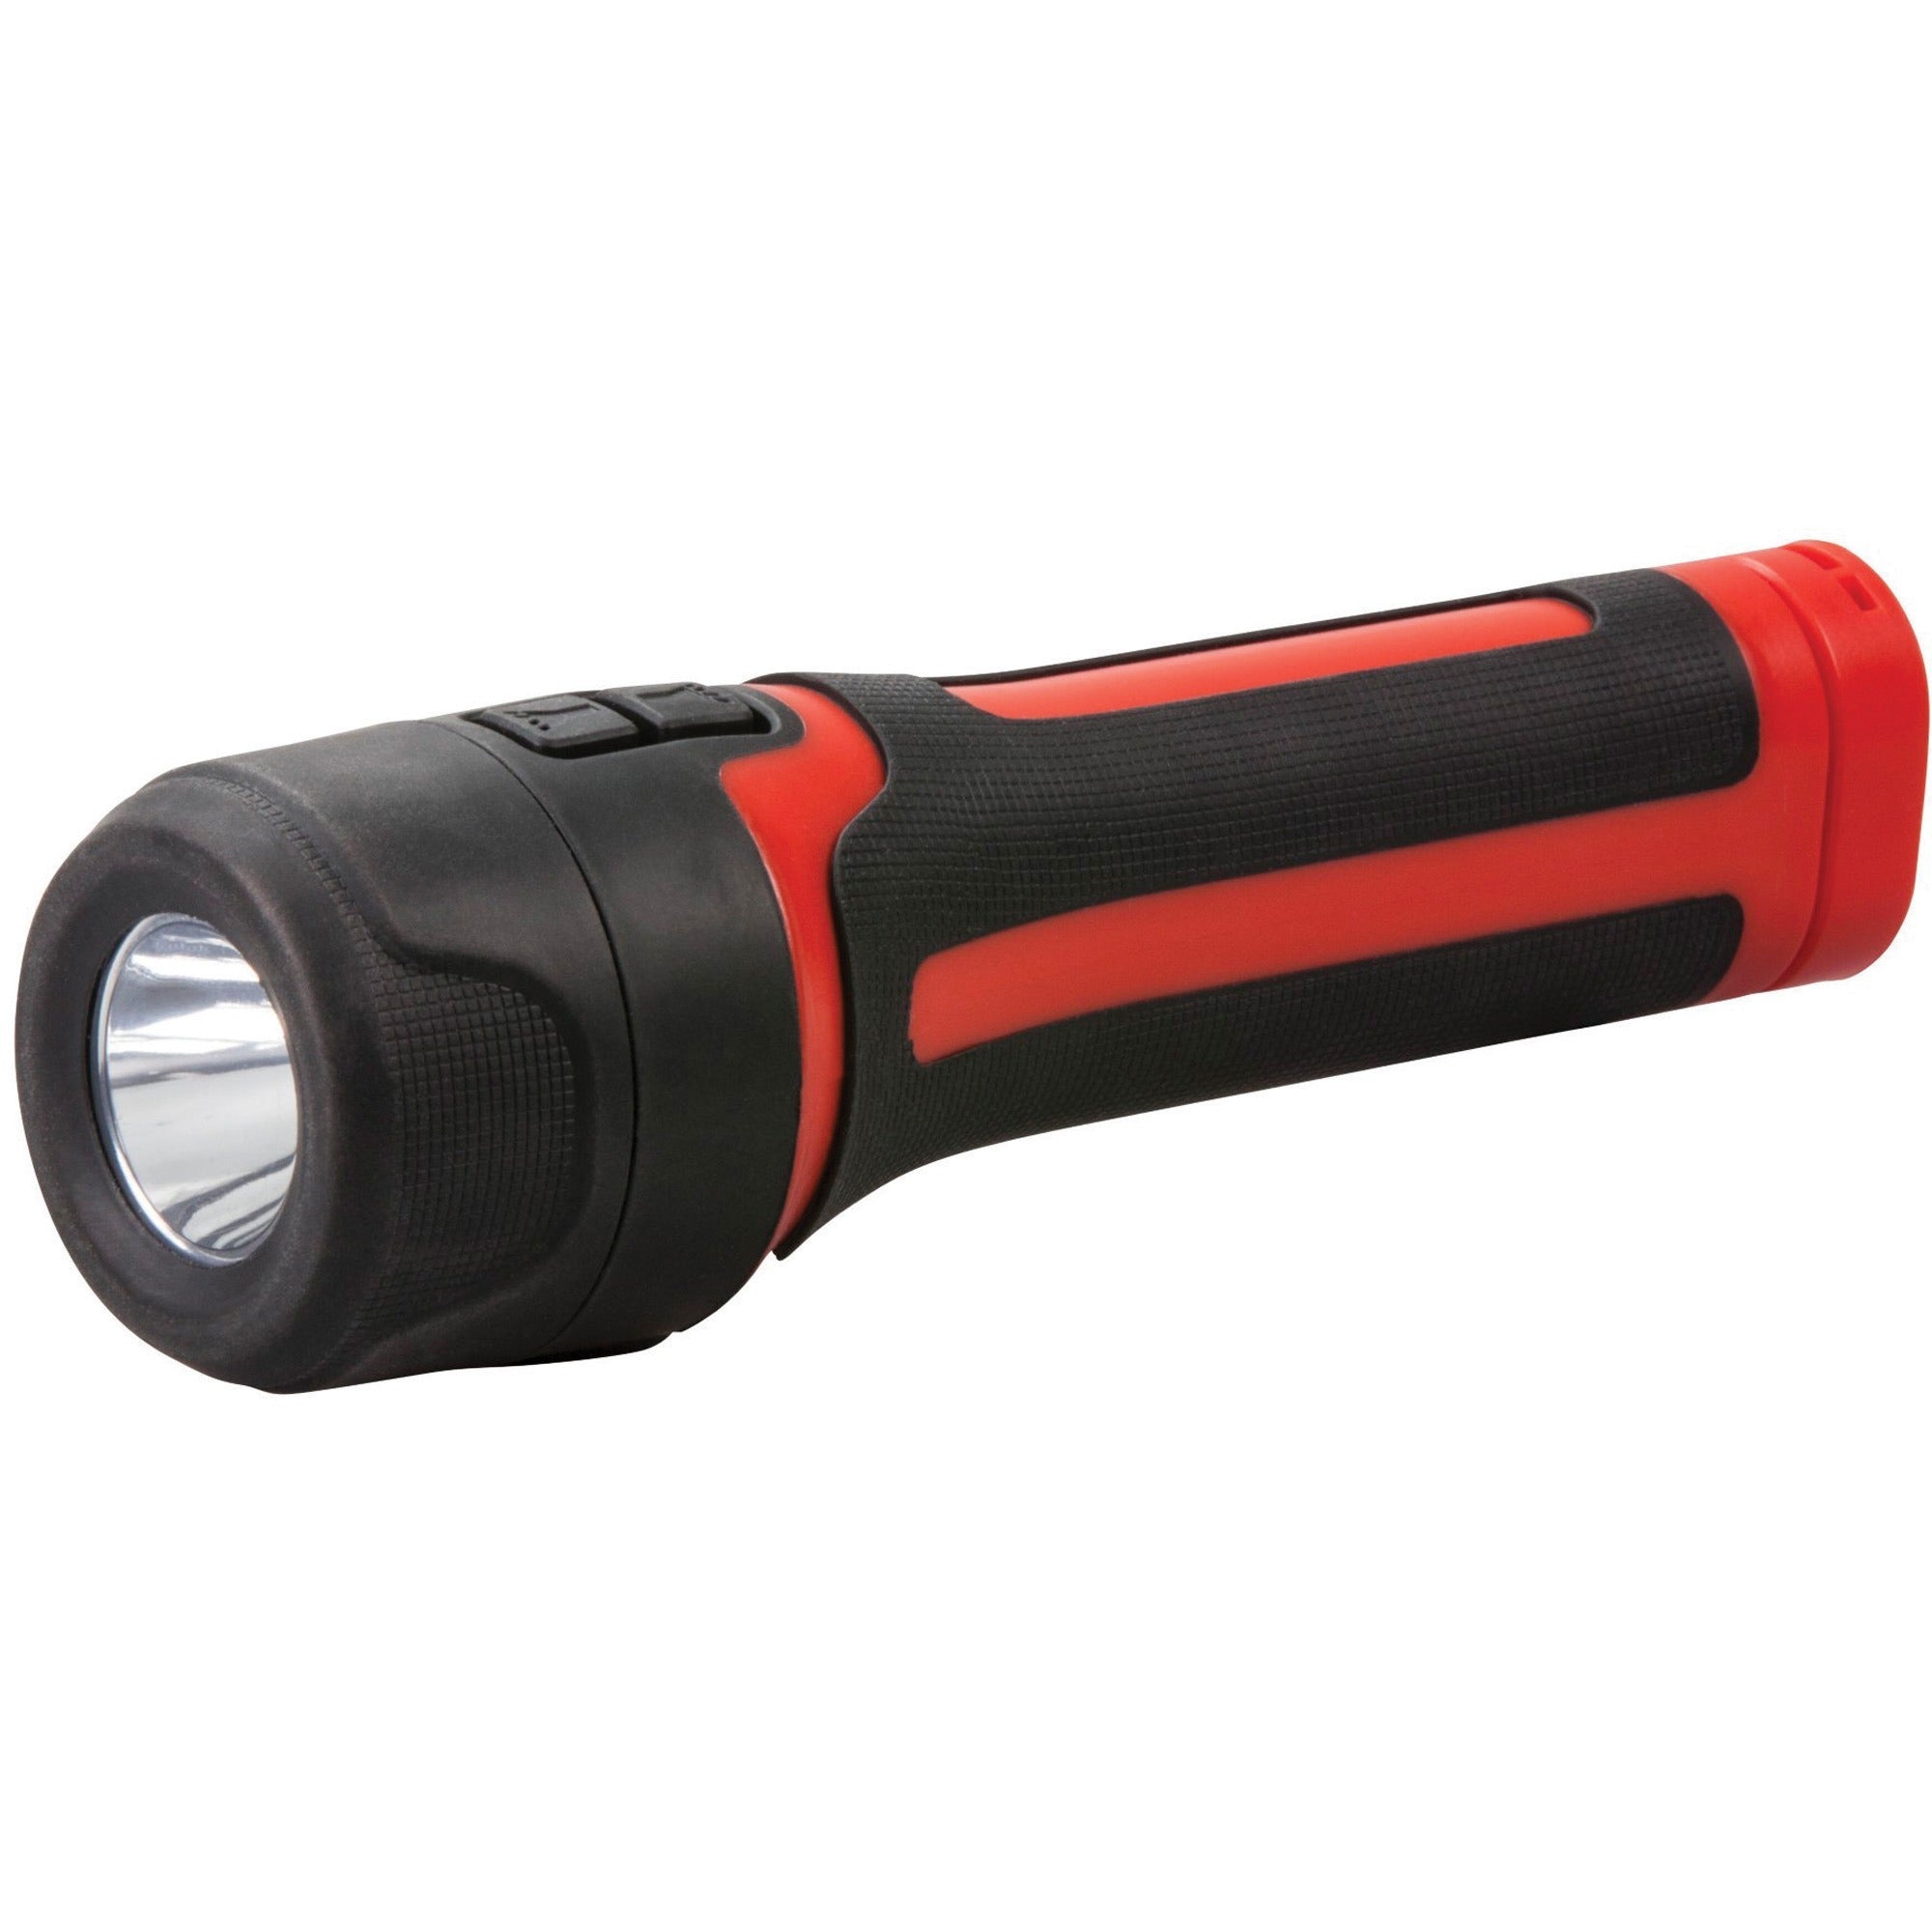 life+gear-stormproof-path-light-150-lm-lumen-4-x-aa-battery-usb-water-proof-impact-resistant-weather-resistant-slip-resistant-black-red_dcyba3860634red - 1